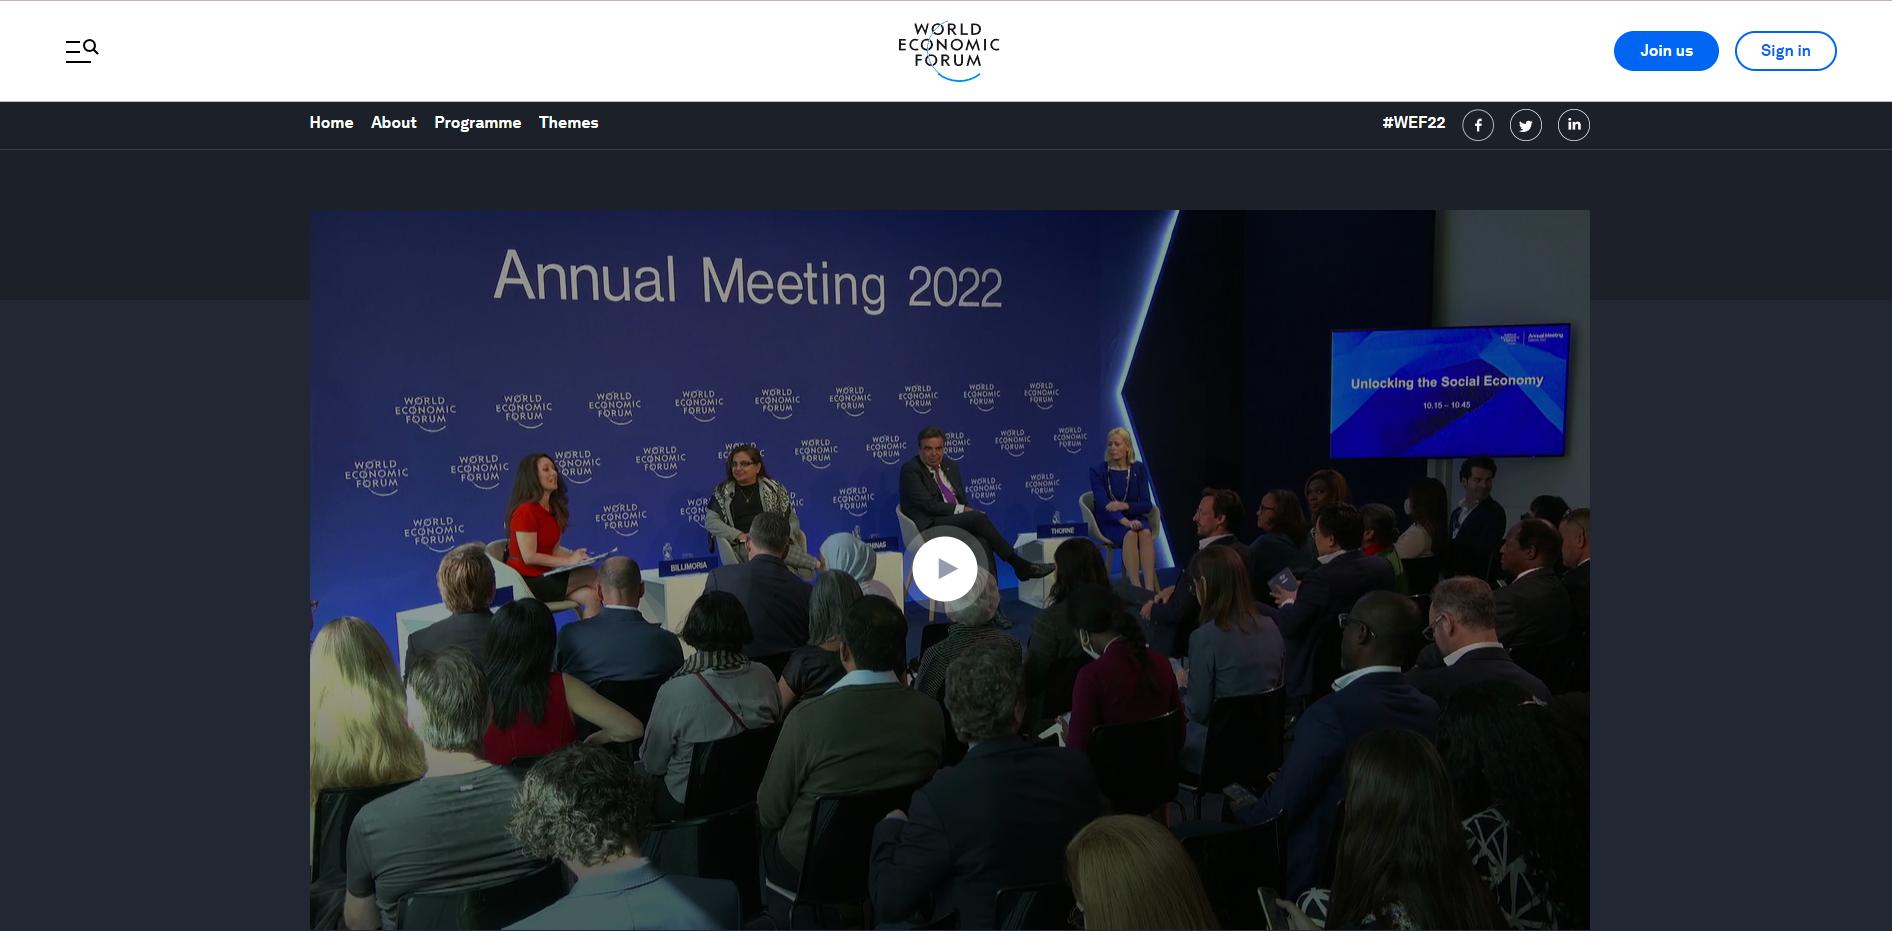 This session was part of the World Economic Forum's Annual Meeting for 2022